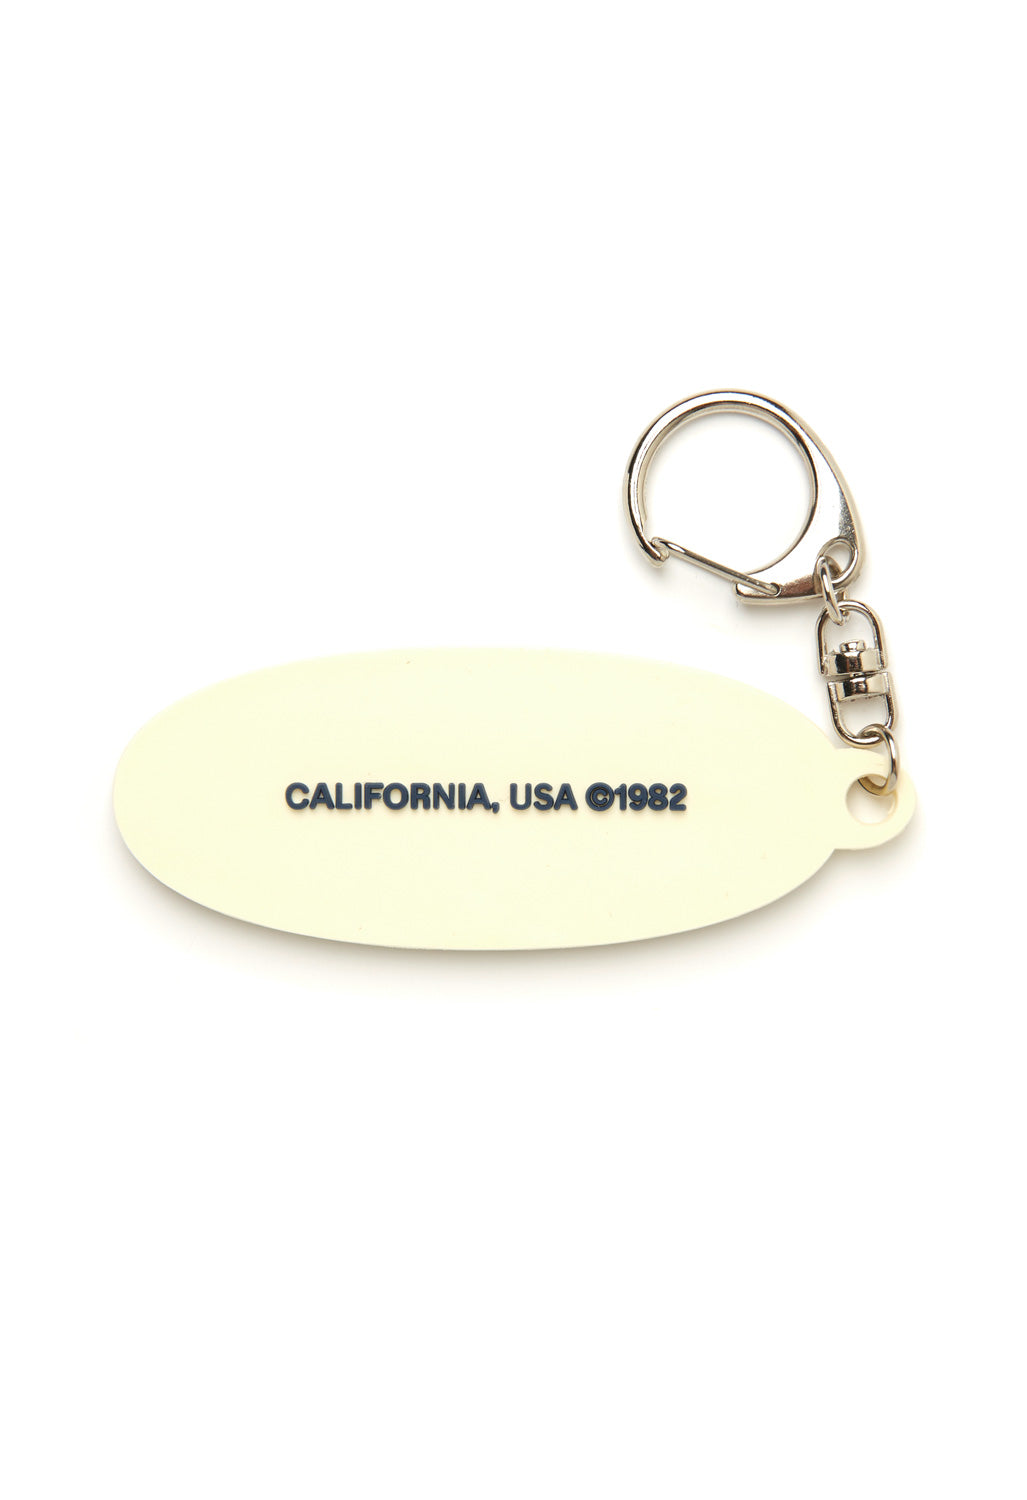 Gramicci Oval Key Ring - Off White